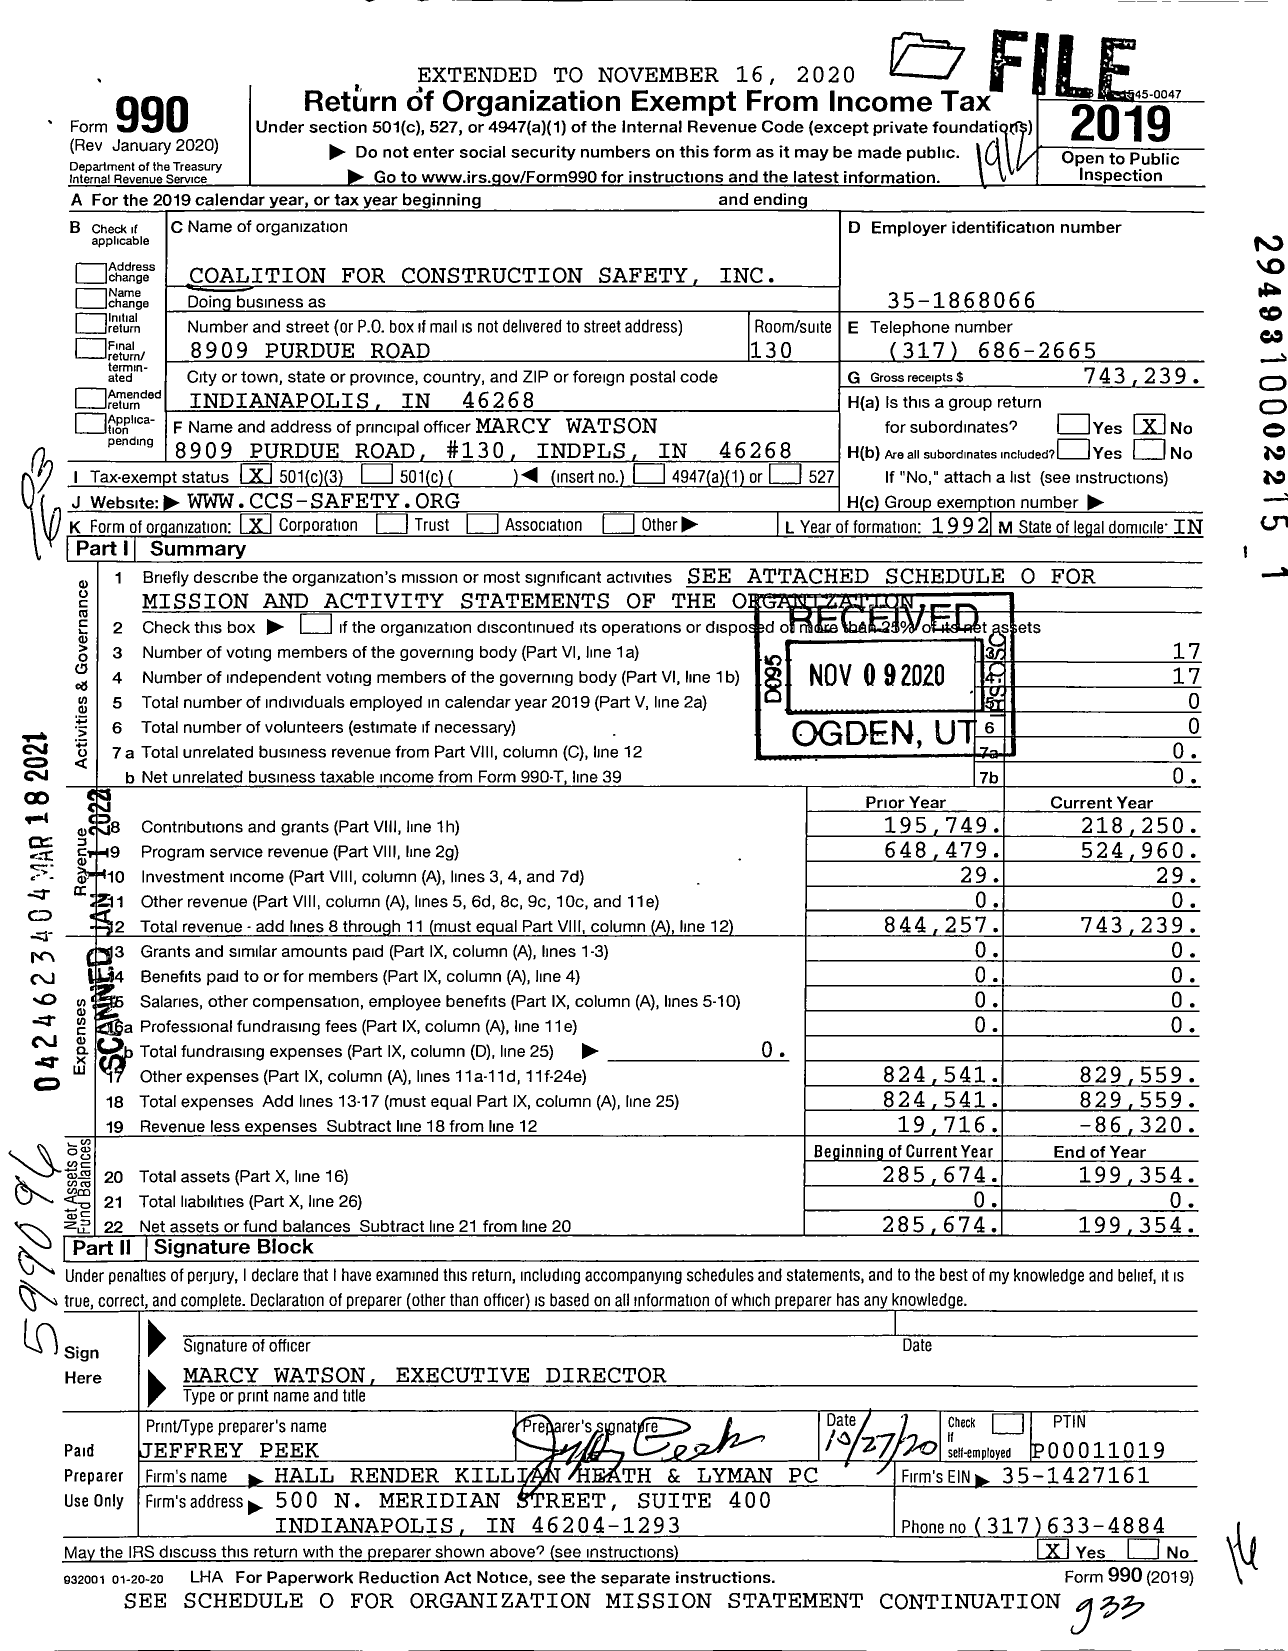 Image of first page of 2019 Form 990 for Coalition for Construction Safety